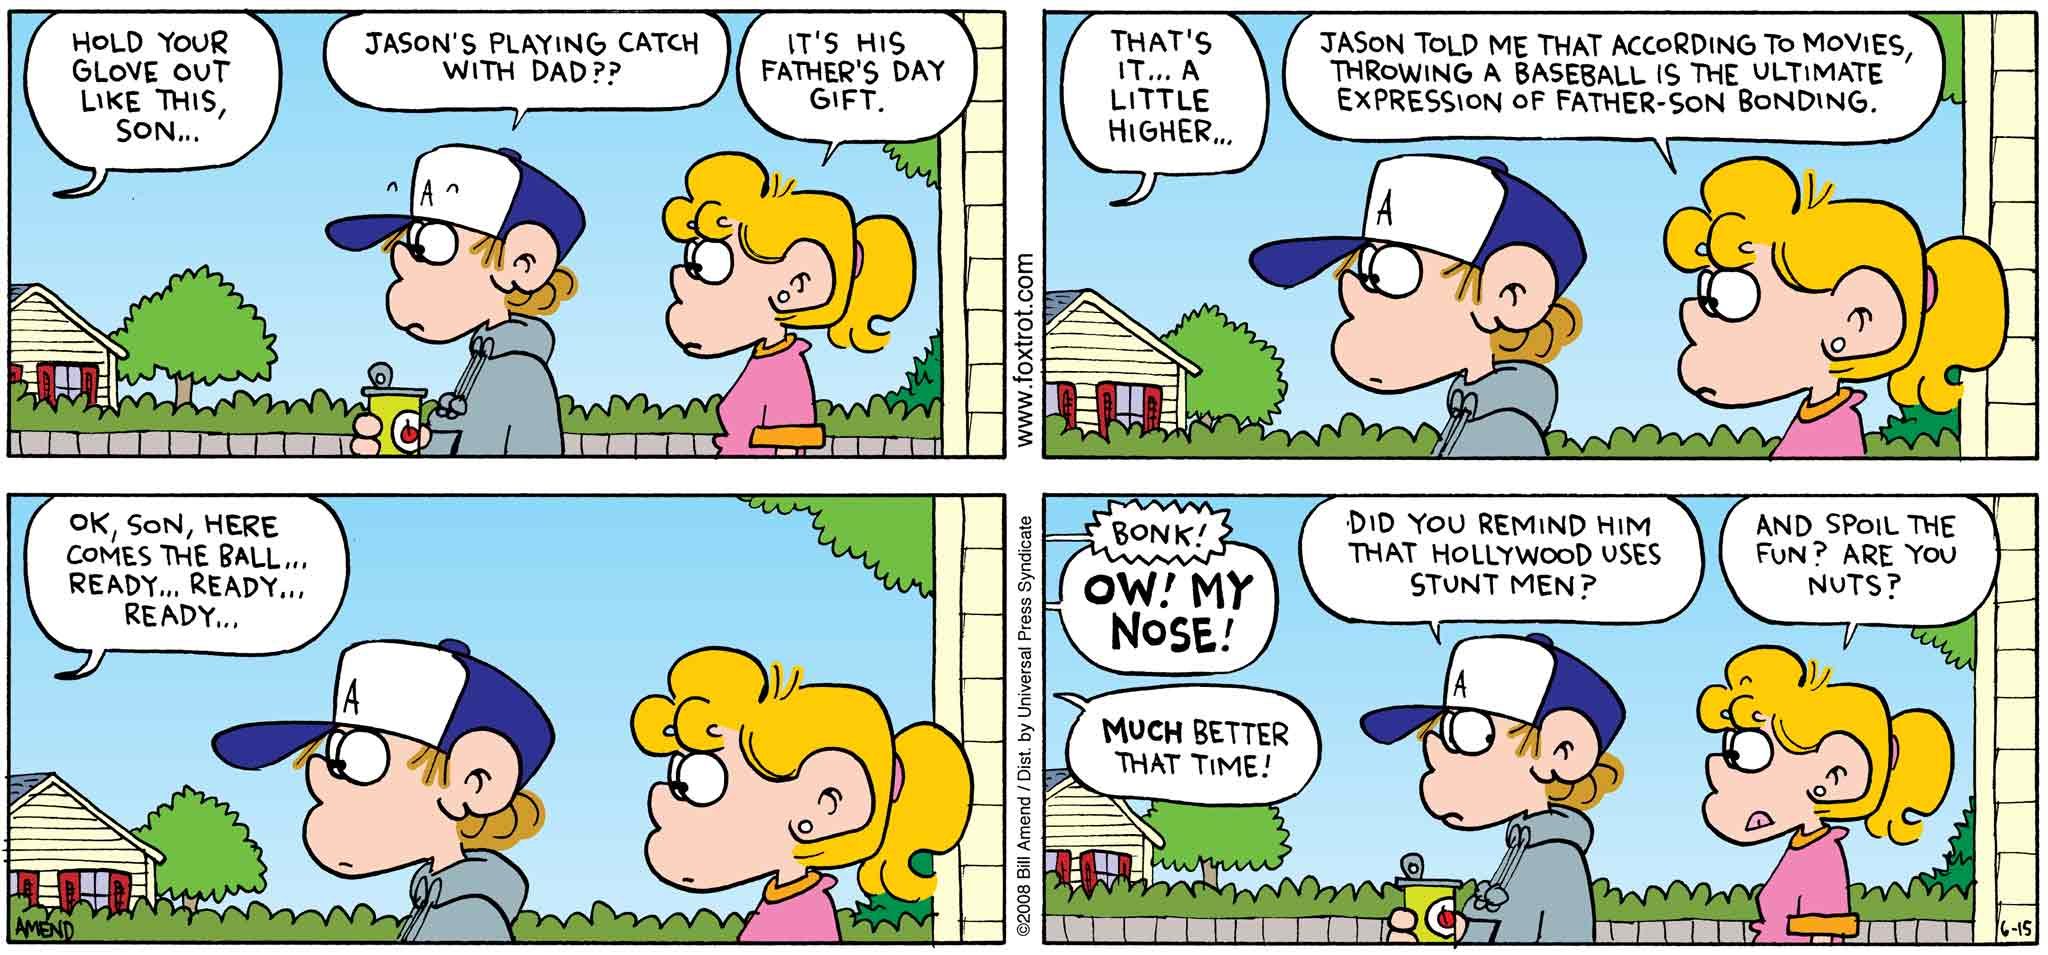 FoxTrot by Bill Amend - Father's Day comic published June 15, 2008 - Roger: Hold you glove out like this, son... Peter: Jason's playing catch with dad?? Paige: it's his Father's Day gift. Roger: That's it... A little higher... Paige: Jason told me that according to movies, throwing a baseball is the ultimate expression of father-son bonding. Roger: Ok, son, here comes the ball... ready... ready... ready... Jason: Ow! My nose! Roger: Much better that time. Peter: Did you remind him that Hollywood uses stunt men? Paige: And spoil the fun? Are you nuts?